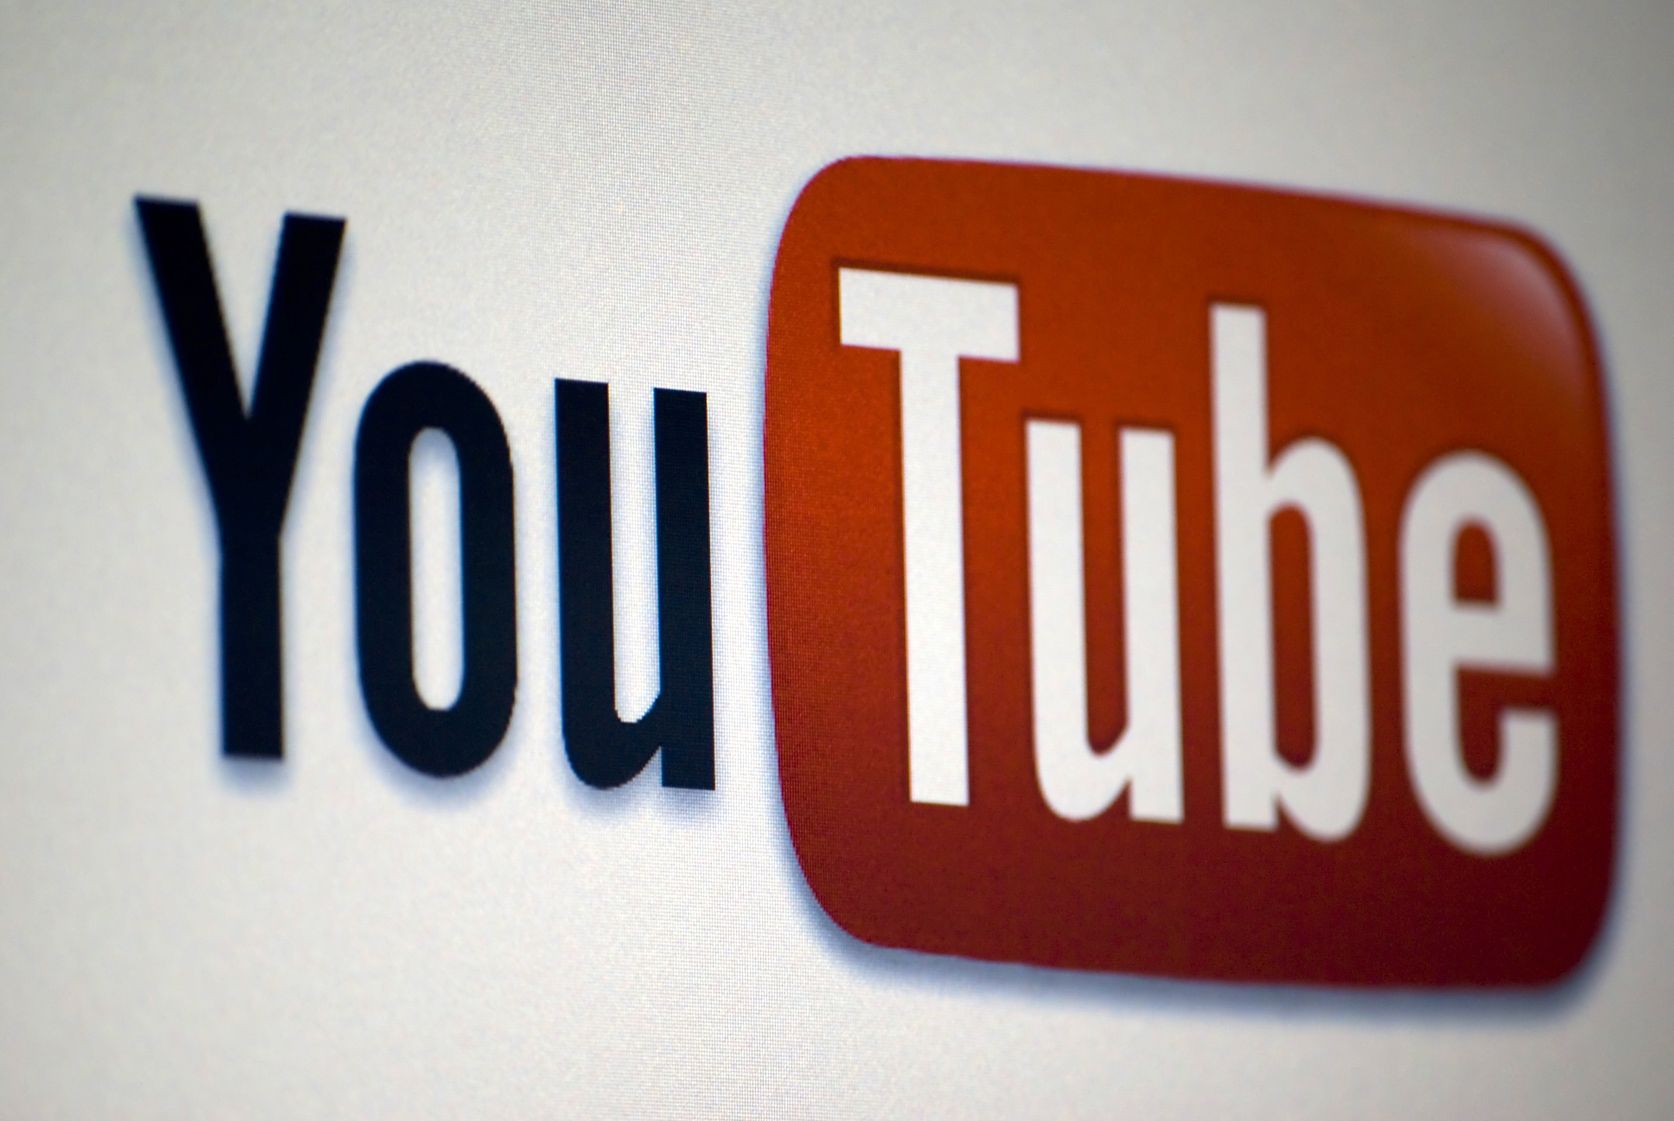 Buy YouTube Views With Instant Delivery